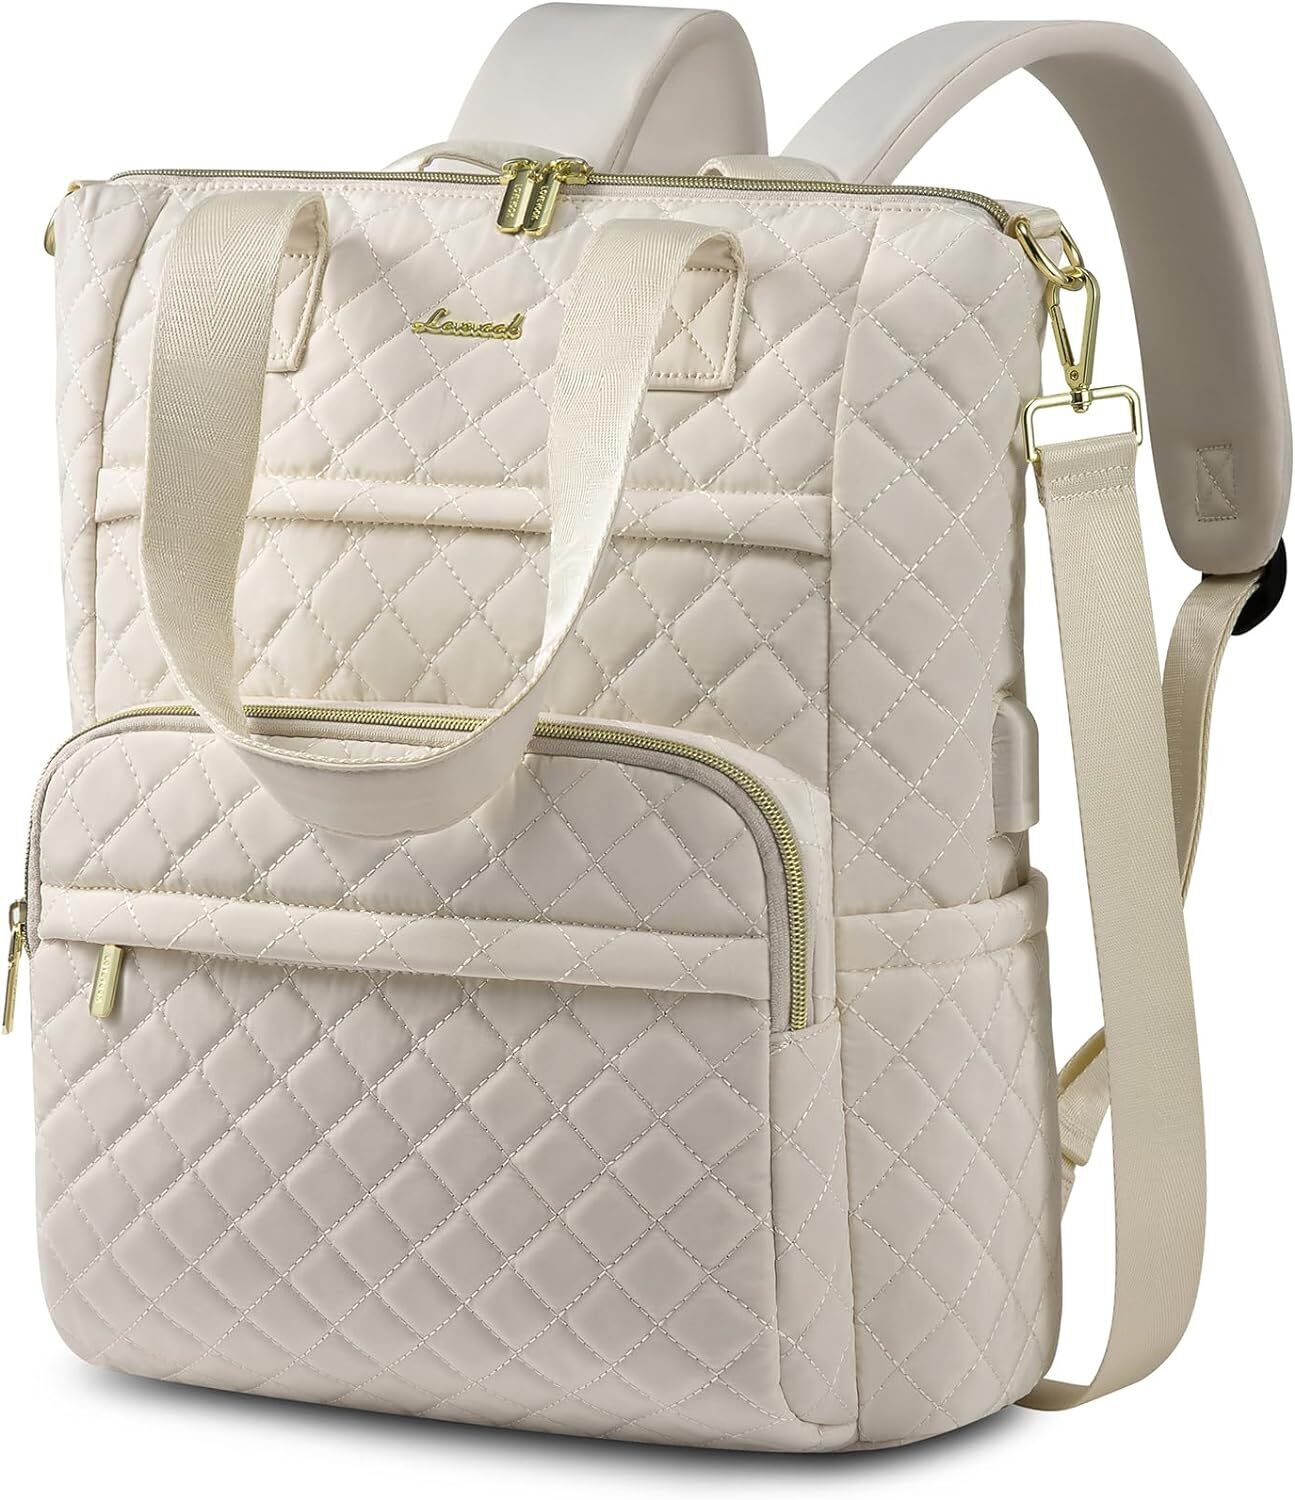 LOVEVOOK Laptop Backpack for Women 15.6 inch,Diamond Quilted Inch, Beige 